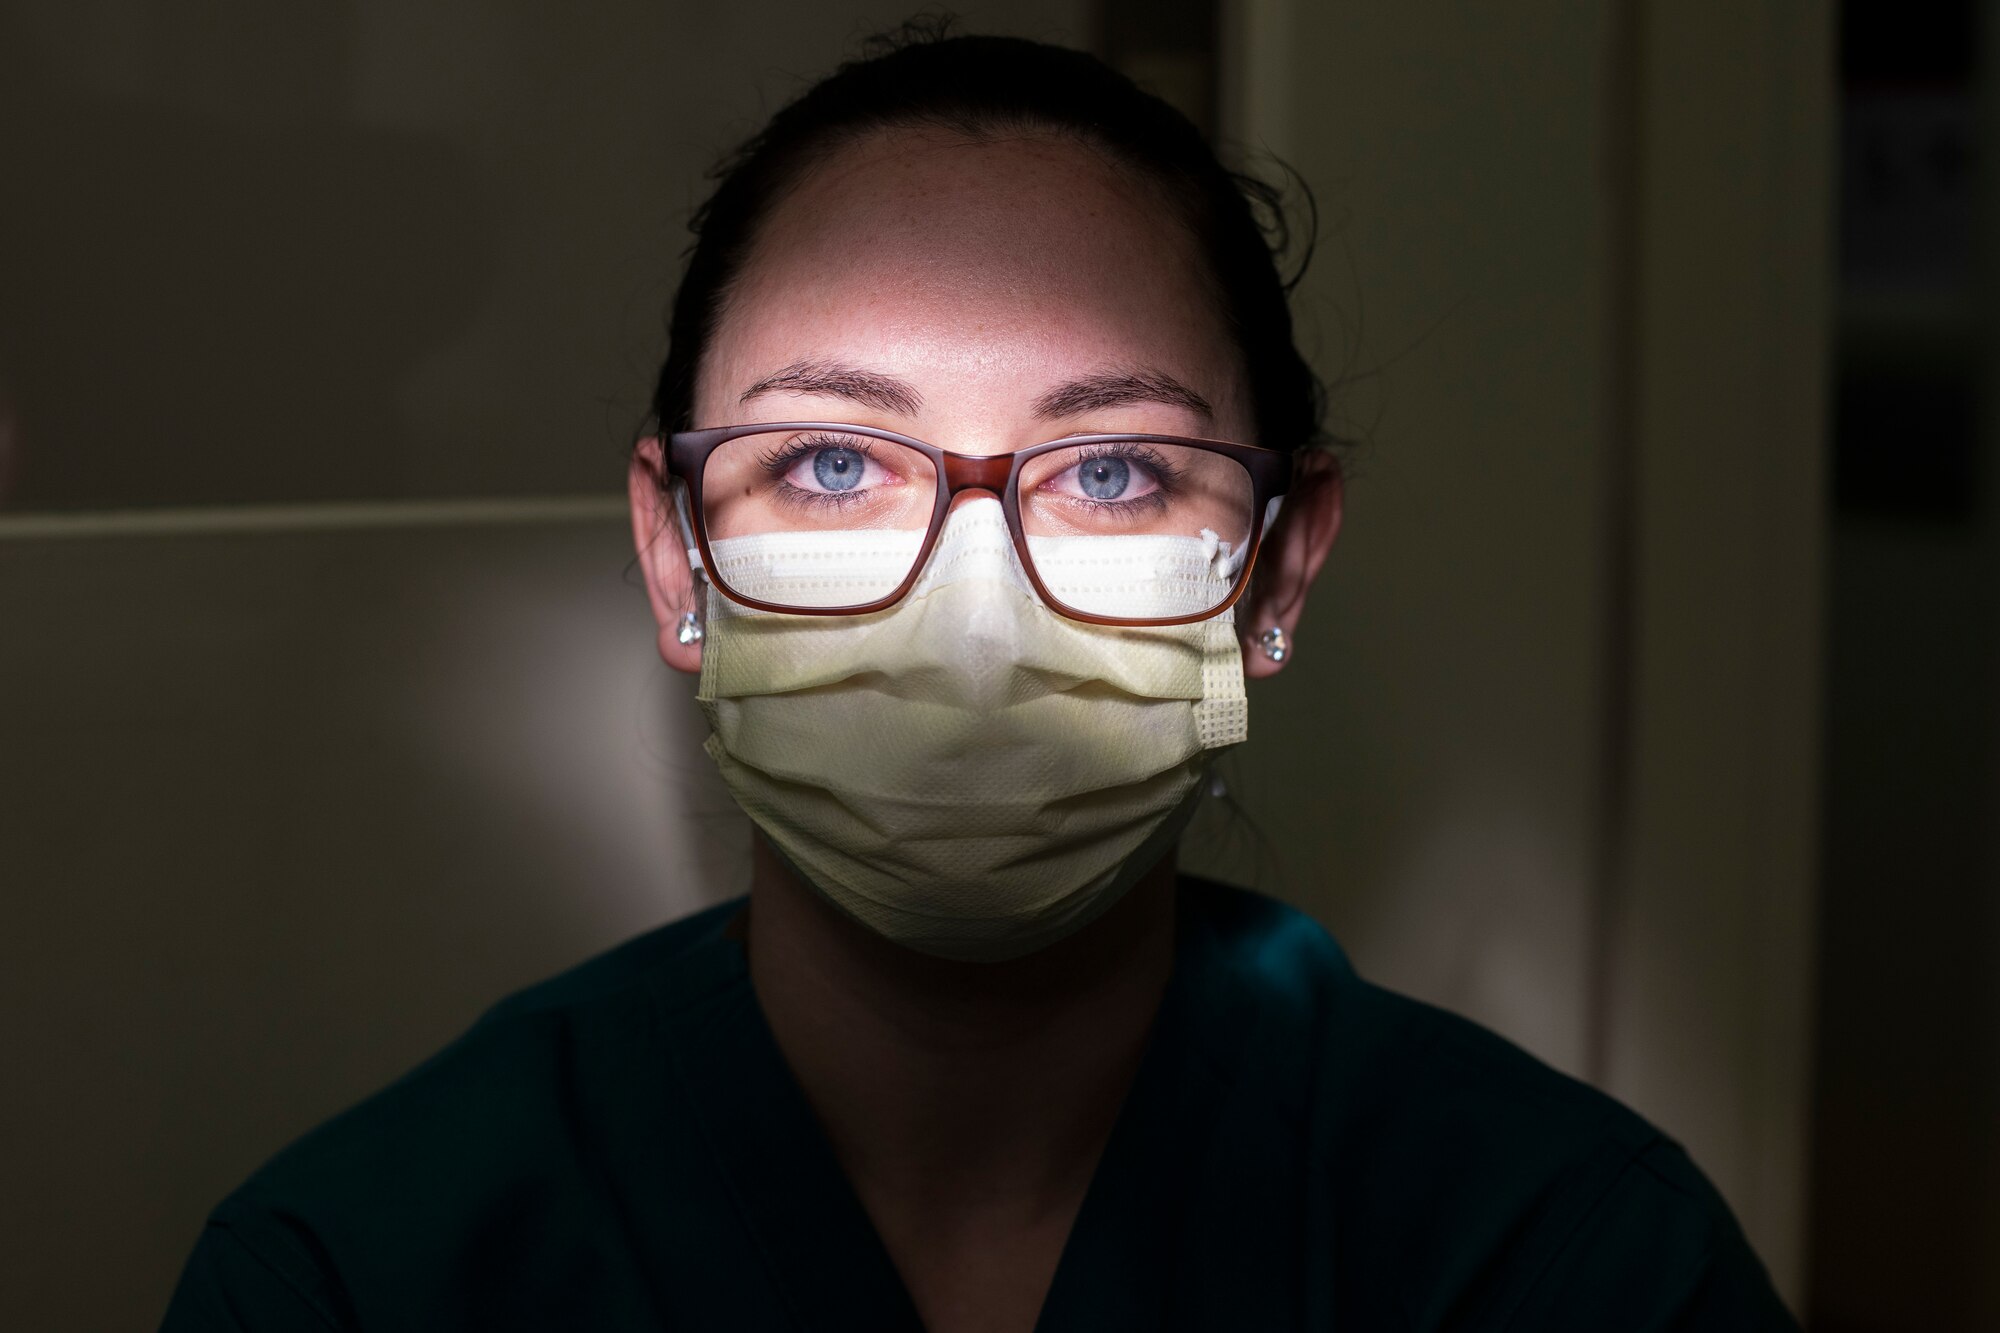 U.S. Air Force Senior Airman Courtney Lott, a 35th Dental Squadron dental technician, poses for a photo at Misawa Air Base, Japan, Aug. 21, 2018. Lott demonstrates she’s an empowered woman by being a full-time, single mother, to her son Dalton Landin, as well as an Airman. (U.S. Air Force photo by Airman 1st Class Collette Brooks)